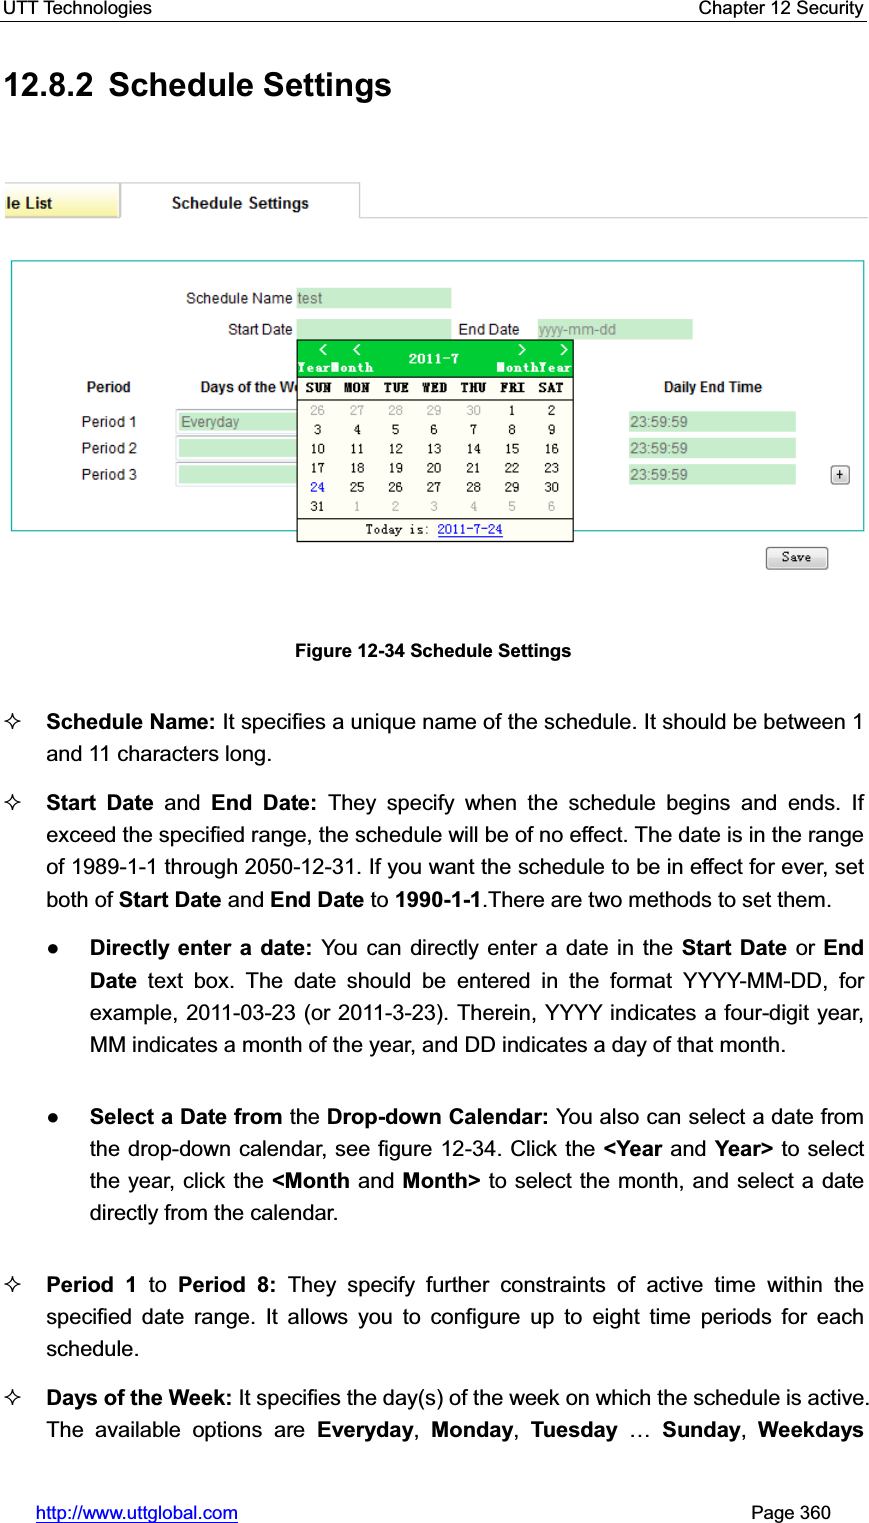 UTT Technologies    Chapter 12 Security   http://www.uttglobal.com                                                       Page 360 12.8.2 Schedule Settings Figure 12-34 Schedule Settings Schedule Name: It specifies a unique name of the schedule. It should be between 1 and 11 characters long.   Start Date and End Date: They specify when the schedule begins and ends. If exceed the specified range, the schedule will be of no effect. The date is in the range of 1989-1-1 through 2050-12-31. If you want the schedule to be in effect for ever, set both of Start Date and End Date to 1990-1-1.There are two methods to set them. ƔDirectly enter a date: You can directly enter a date in the Start Date or EndDate text box. The date should be entered in the format YYYY-MM-DD, for example, 2011-03-23 (or 2011-3-23). Therein, YYYY indicates a four-digit year, MM indicates a month of the year, and DD indicates a day of that month.   ƔSelect a Date from the Drop-down Calendar: You also can select a date from the drop-down calendar, see figure 12-34. Click the &lt;Year and Year&gt; to select the year, click the &lt;Month and Month&gt; to select the month, and select a date directly from the calendar. Period 1 to Period 8: They specify further constraints of active time within the specified date range. It allows you to configure up to eight time periods for each schedule. Days of the Week: It specifies the day(s) of the week on which the schedule is active. The available options are Everyday,Monday,Tuesday «Sunday,Weekdays